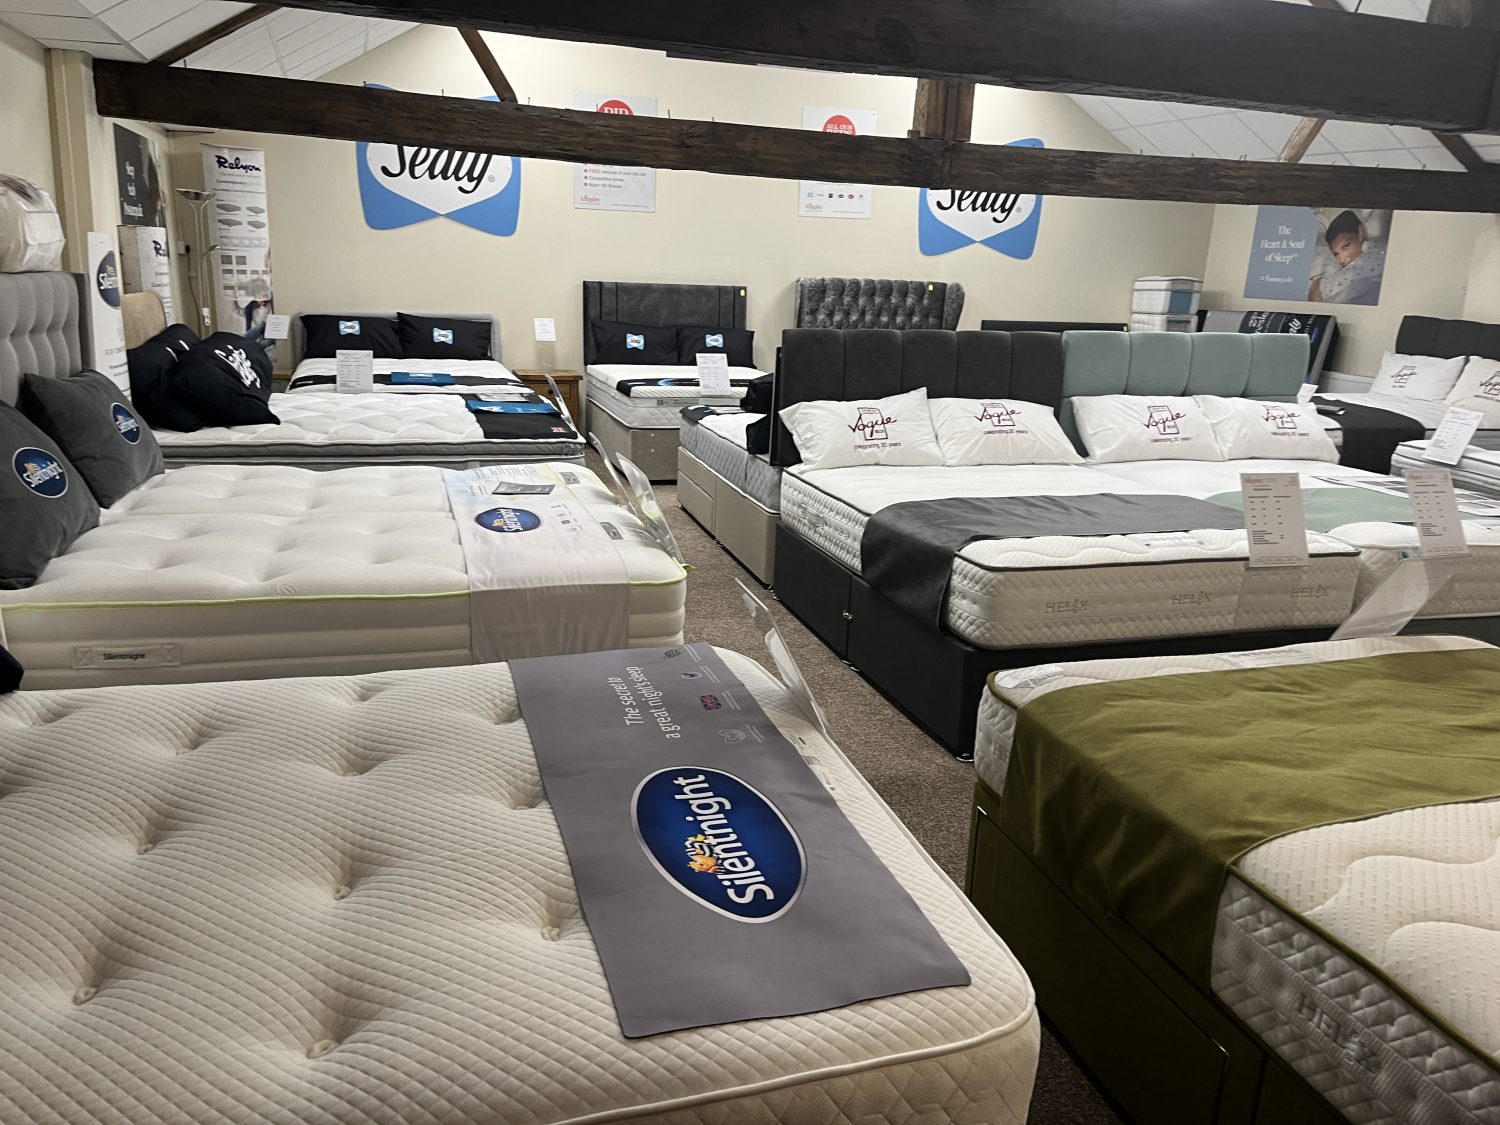 SEALY MATTRESS Winter sale on all ranges